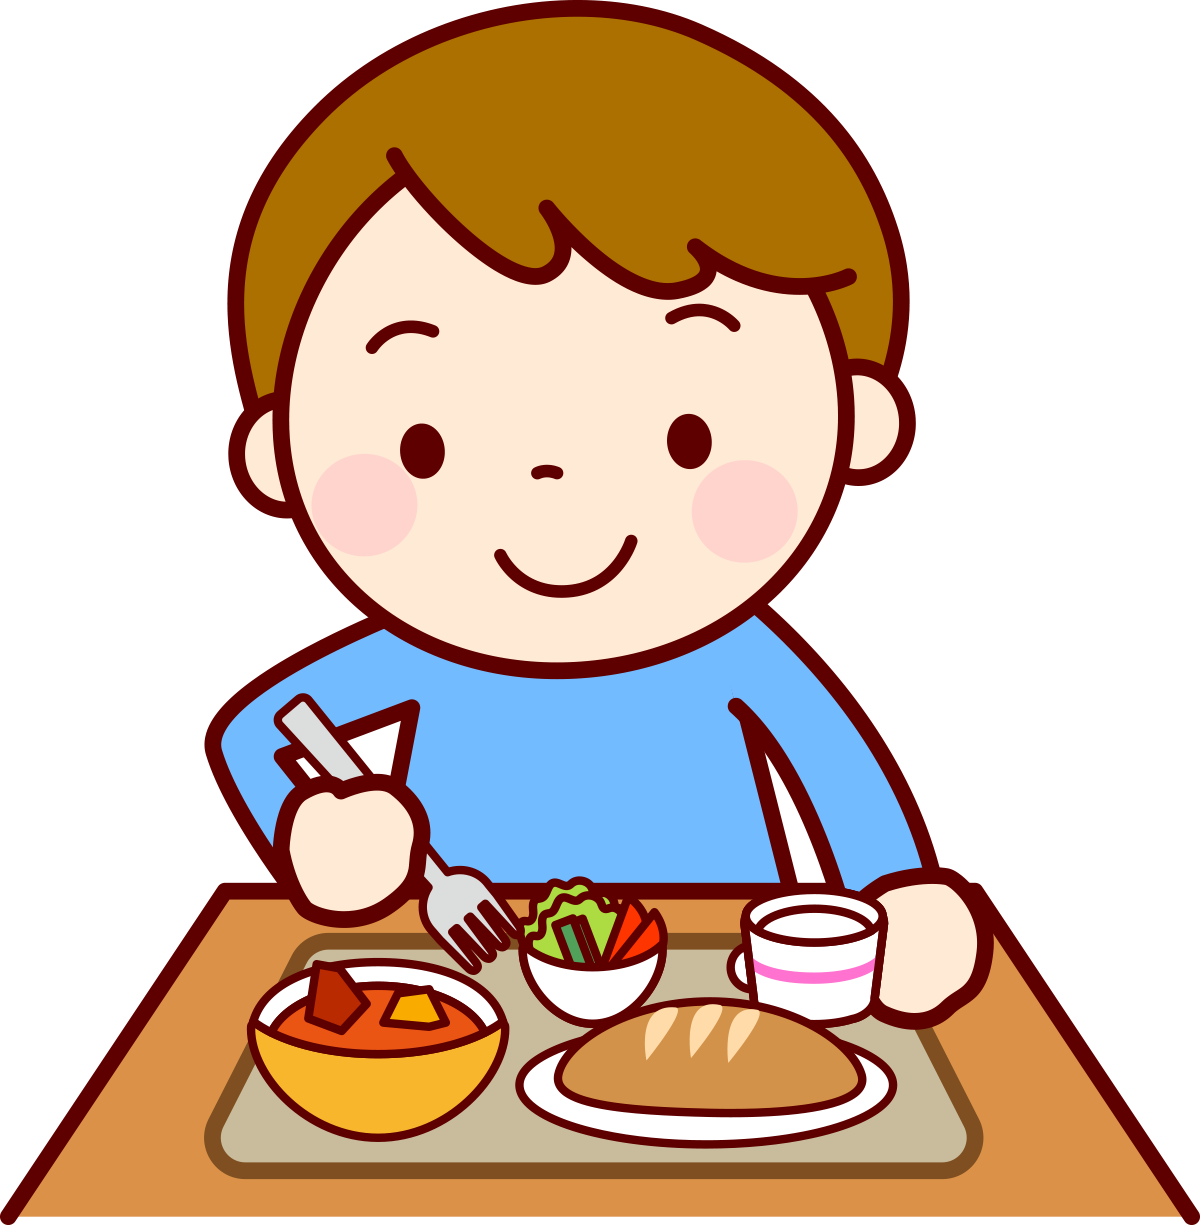 A Cartoon Of A Boy Eating At A Table